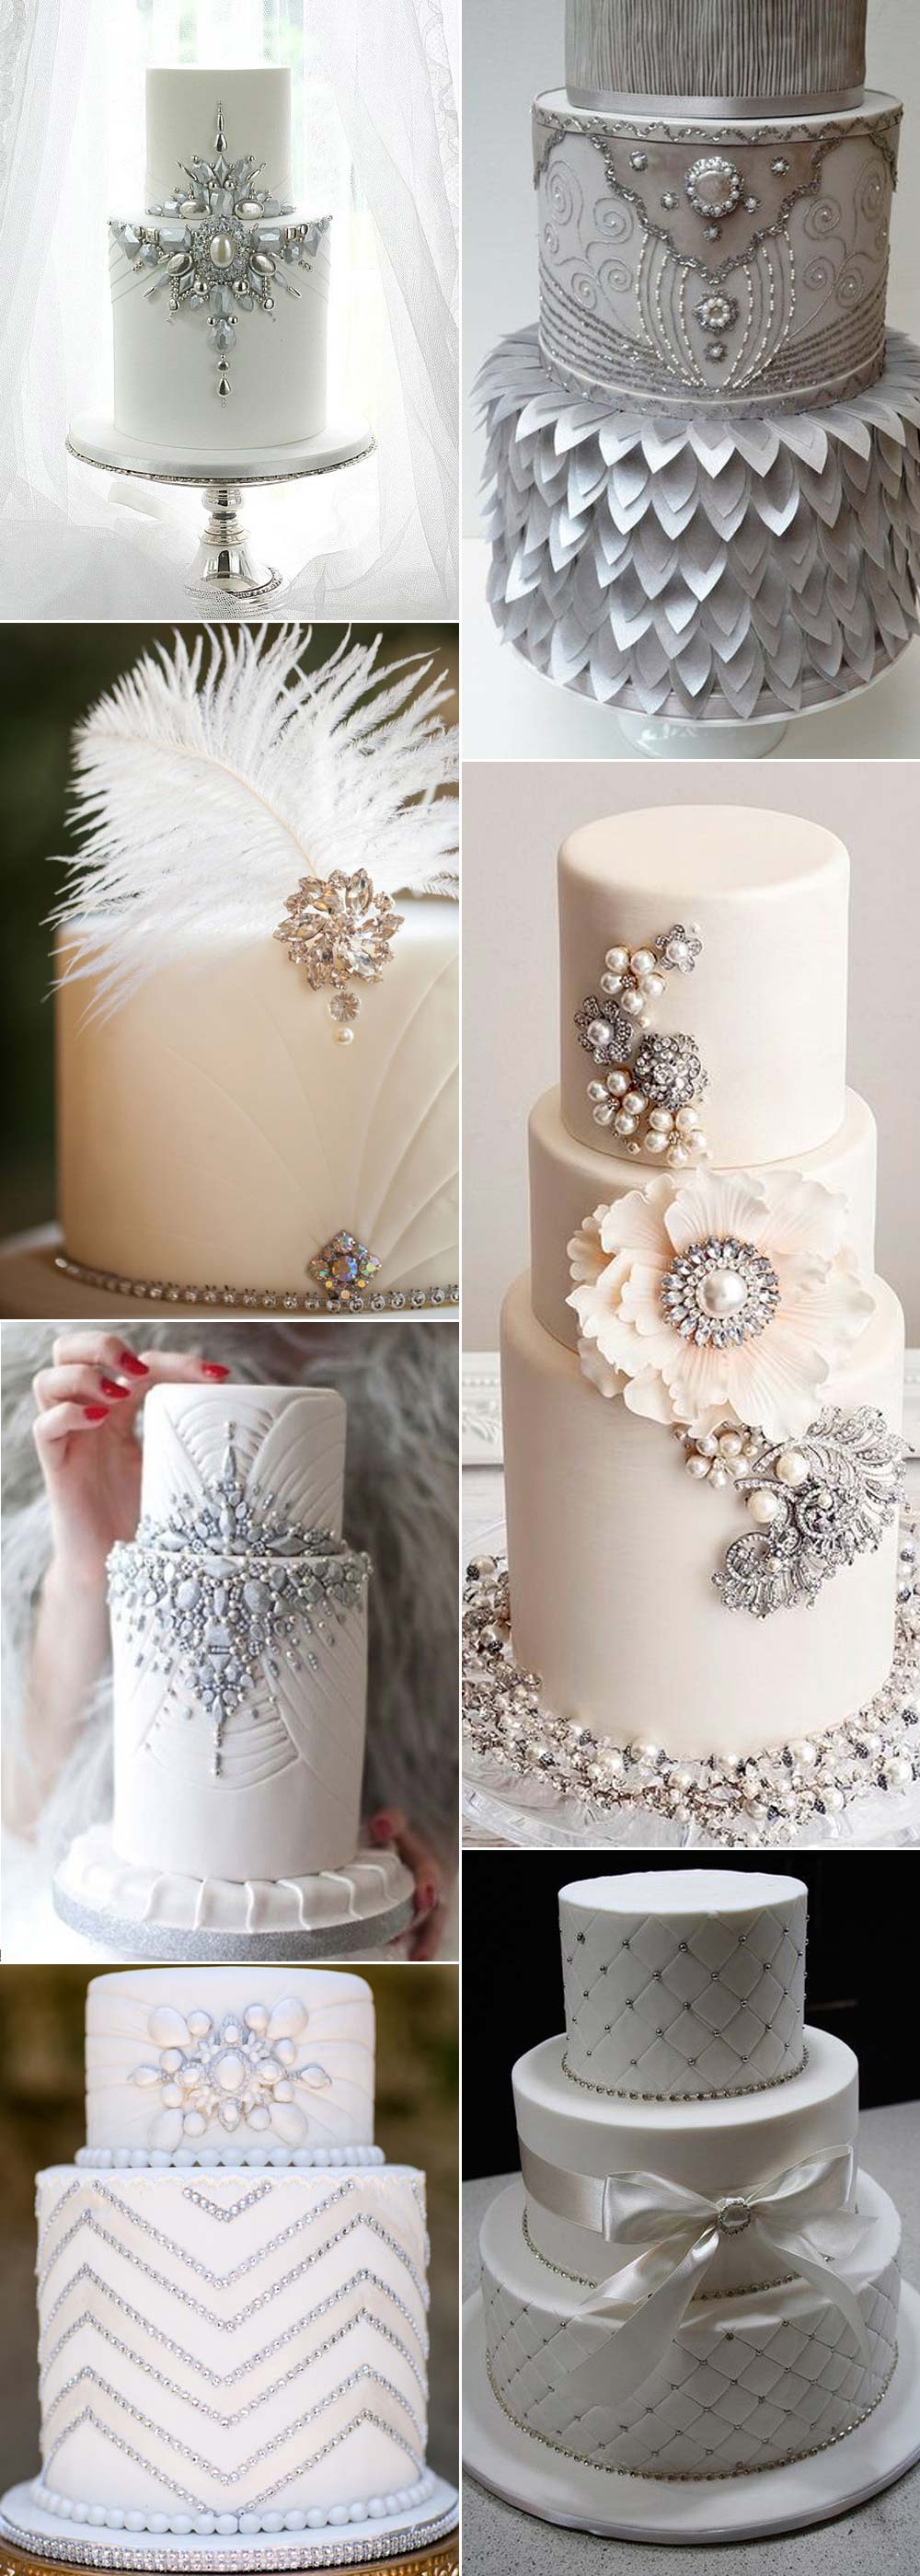 Jewelled wedding cake ideas for your big day